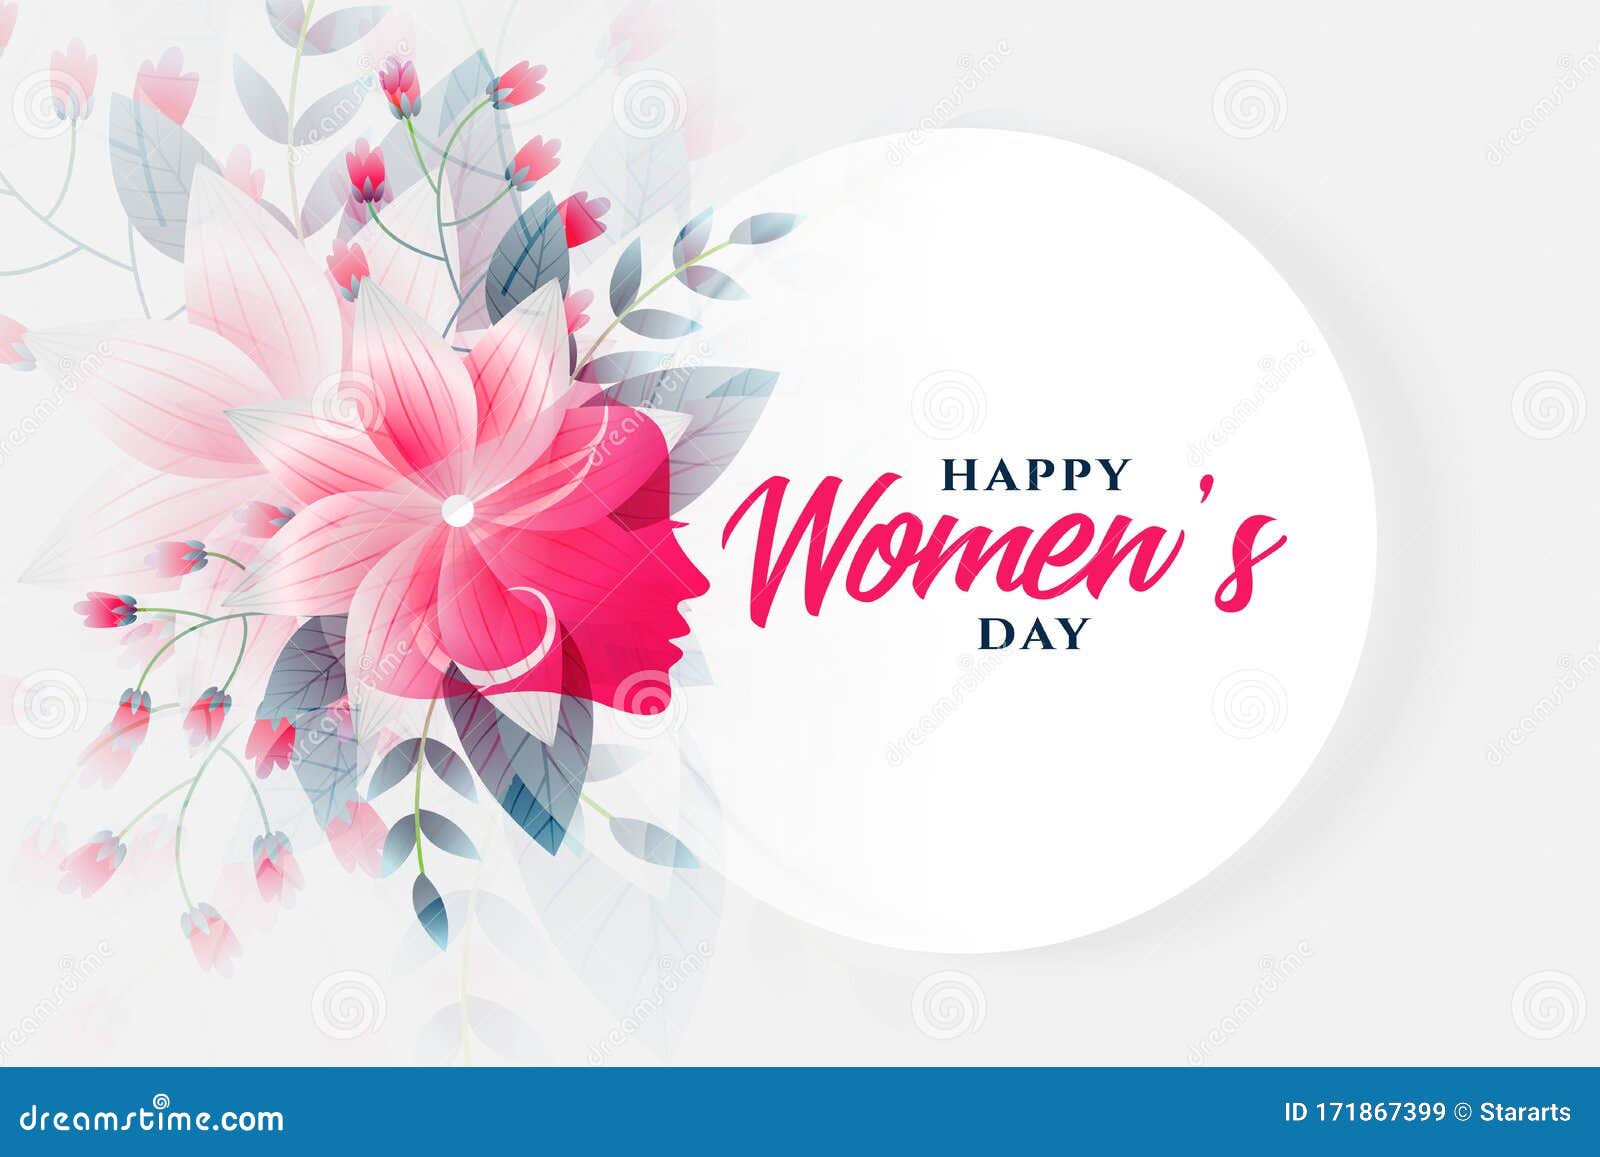 Happy Womens Day Flower Background with Face Stock Vector ...